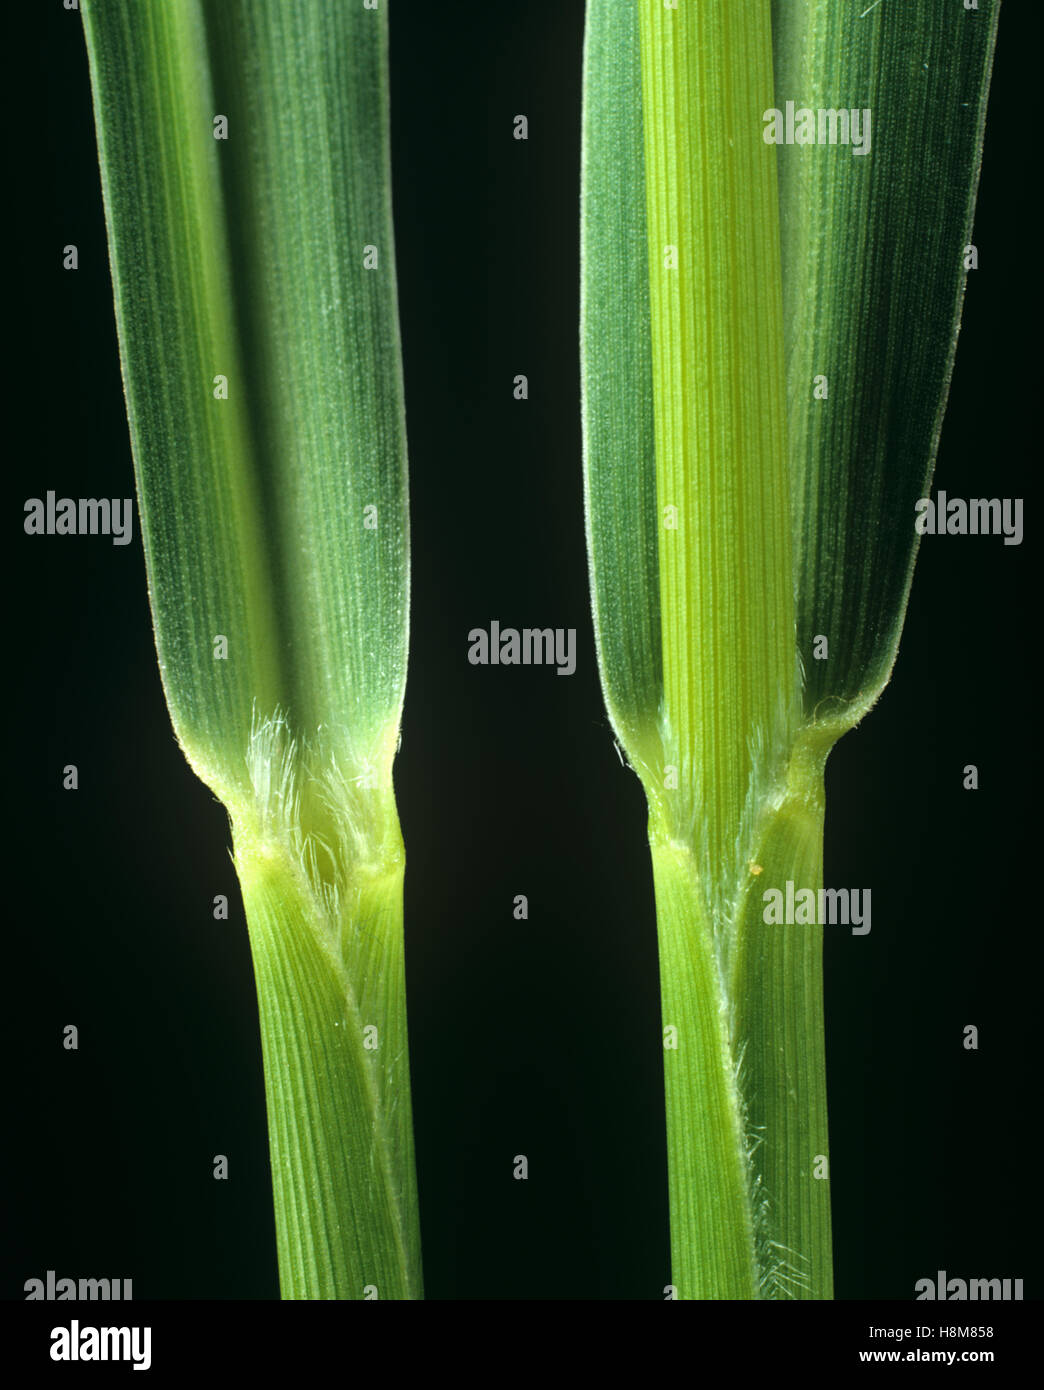 Chinese millet or foxtail, Setaria faberi, leaf ligule at the node and leafstalk of an agricultural grass weed Stock Photo